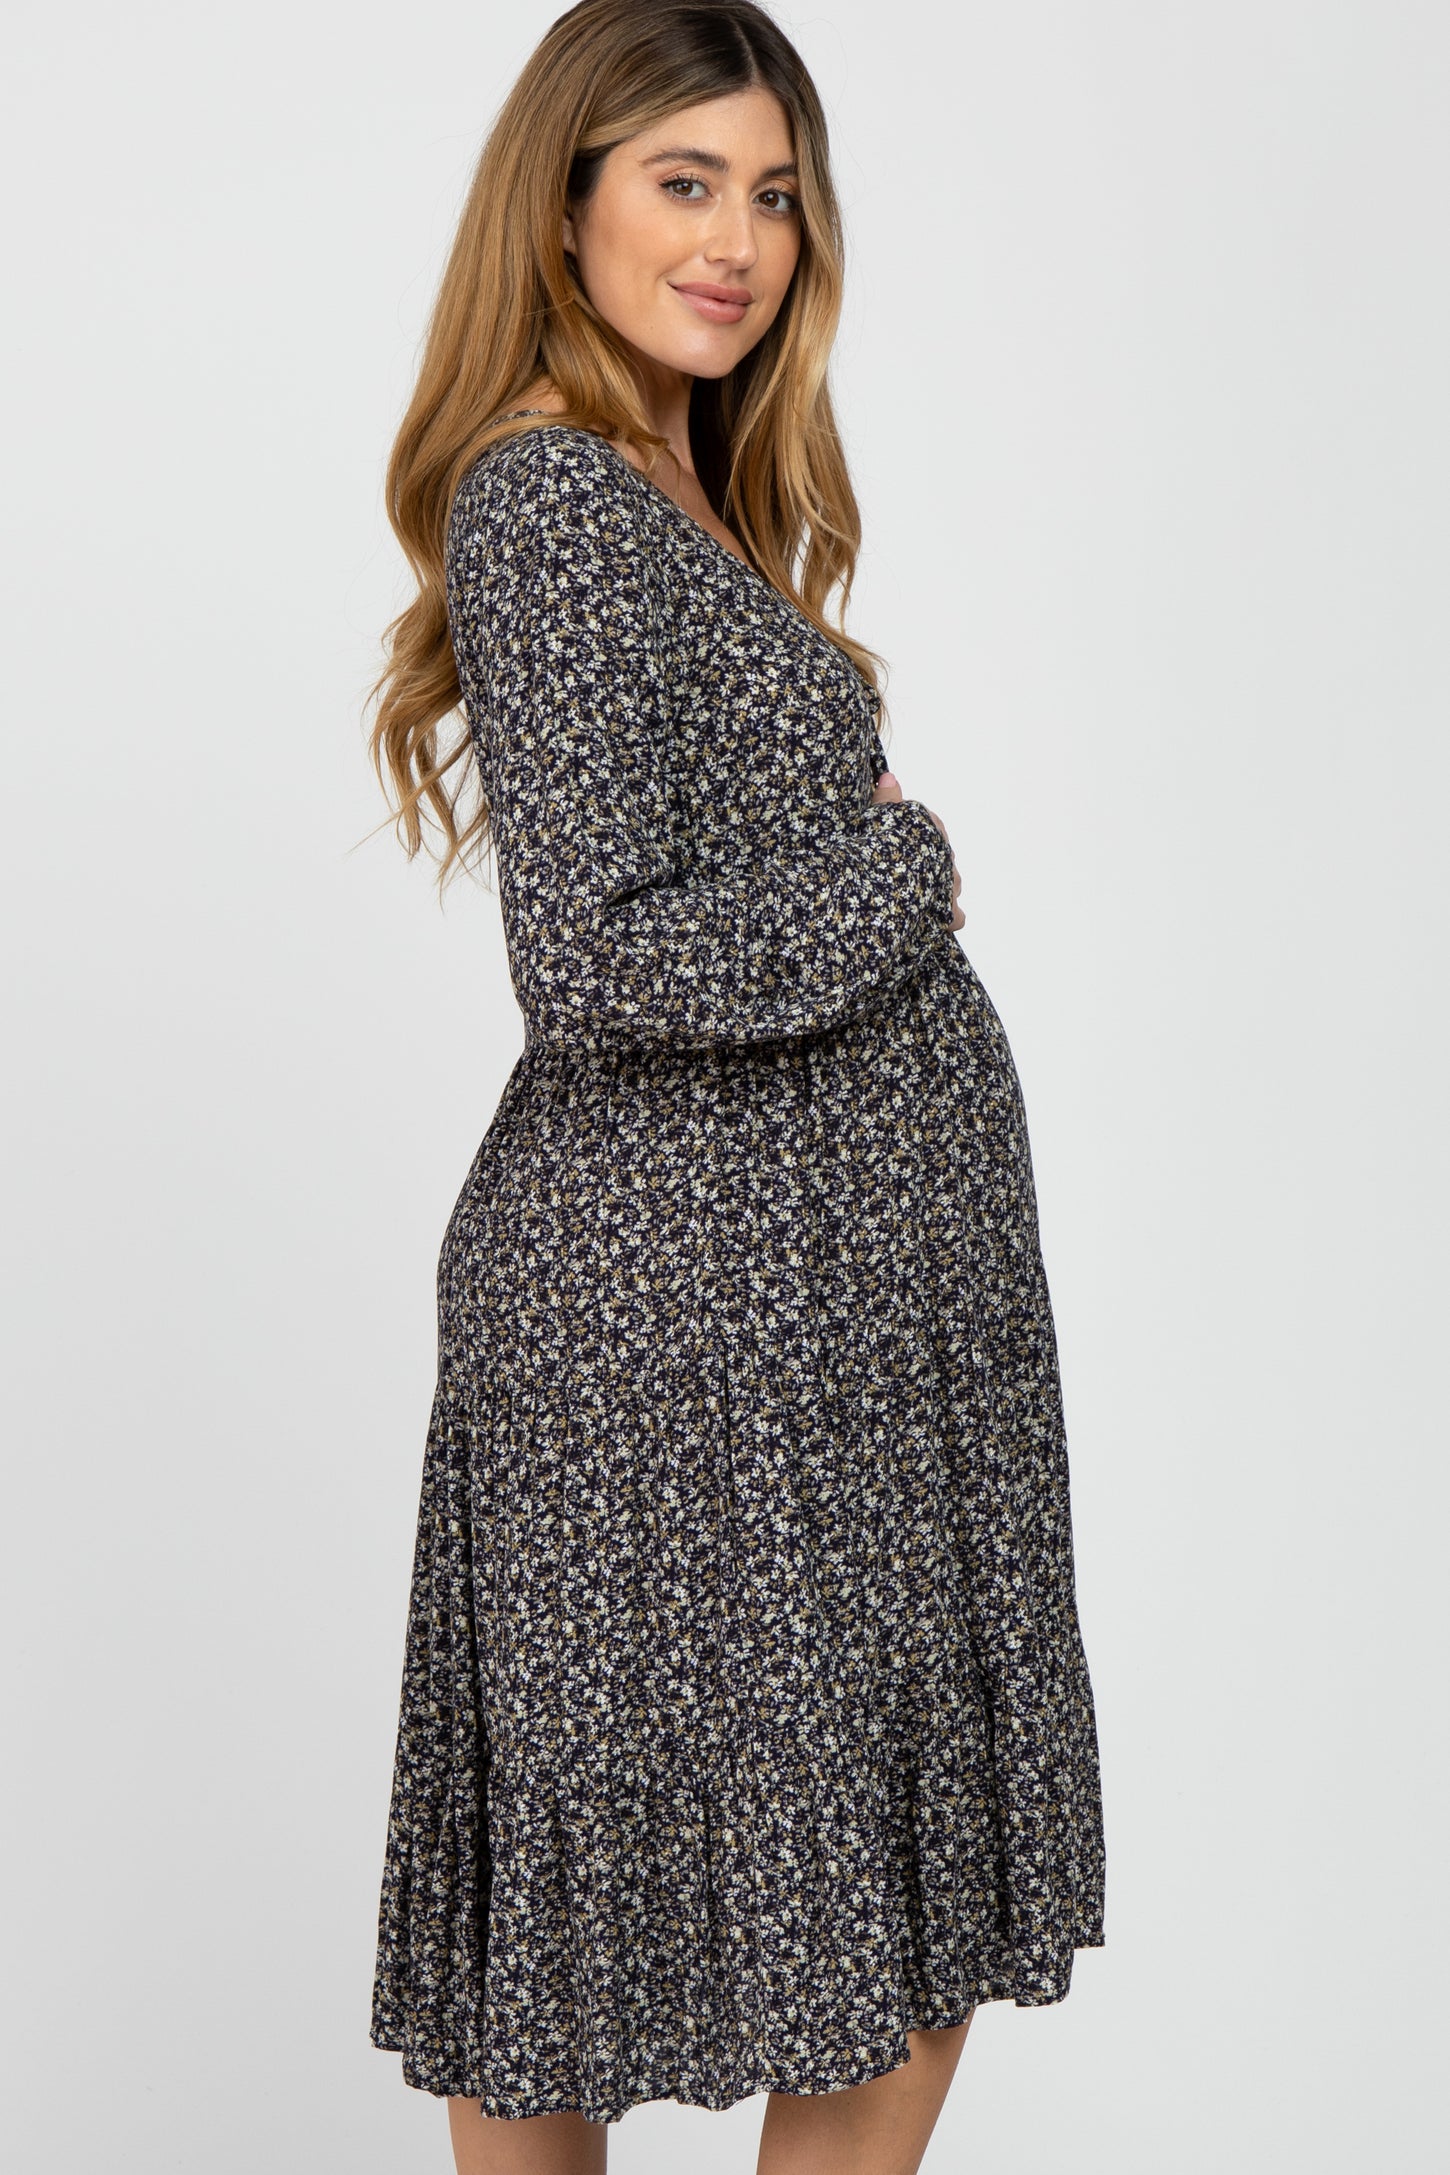 Navy Blue Floral Front Tie Maternity Midi Dress